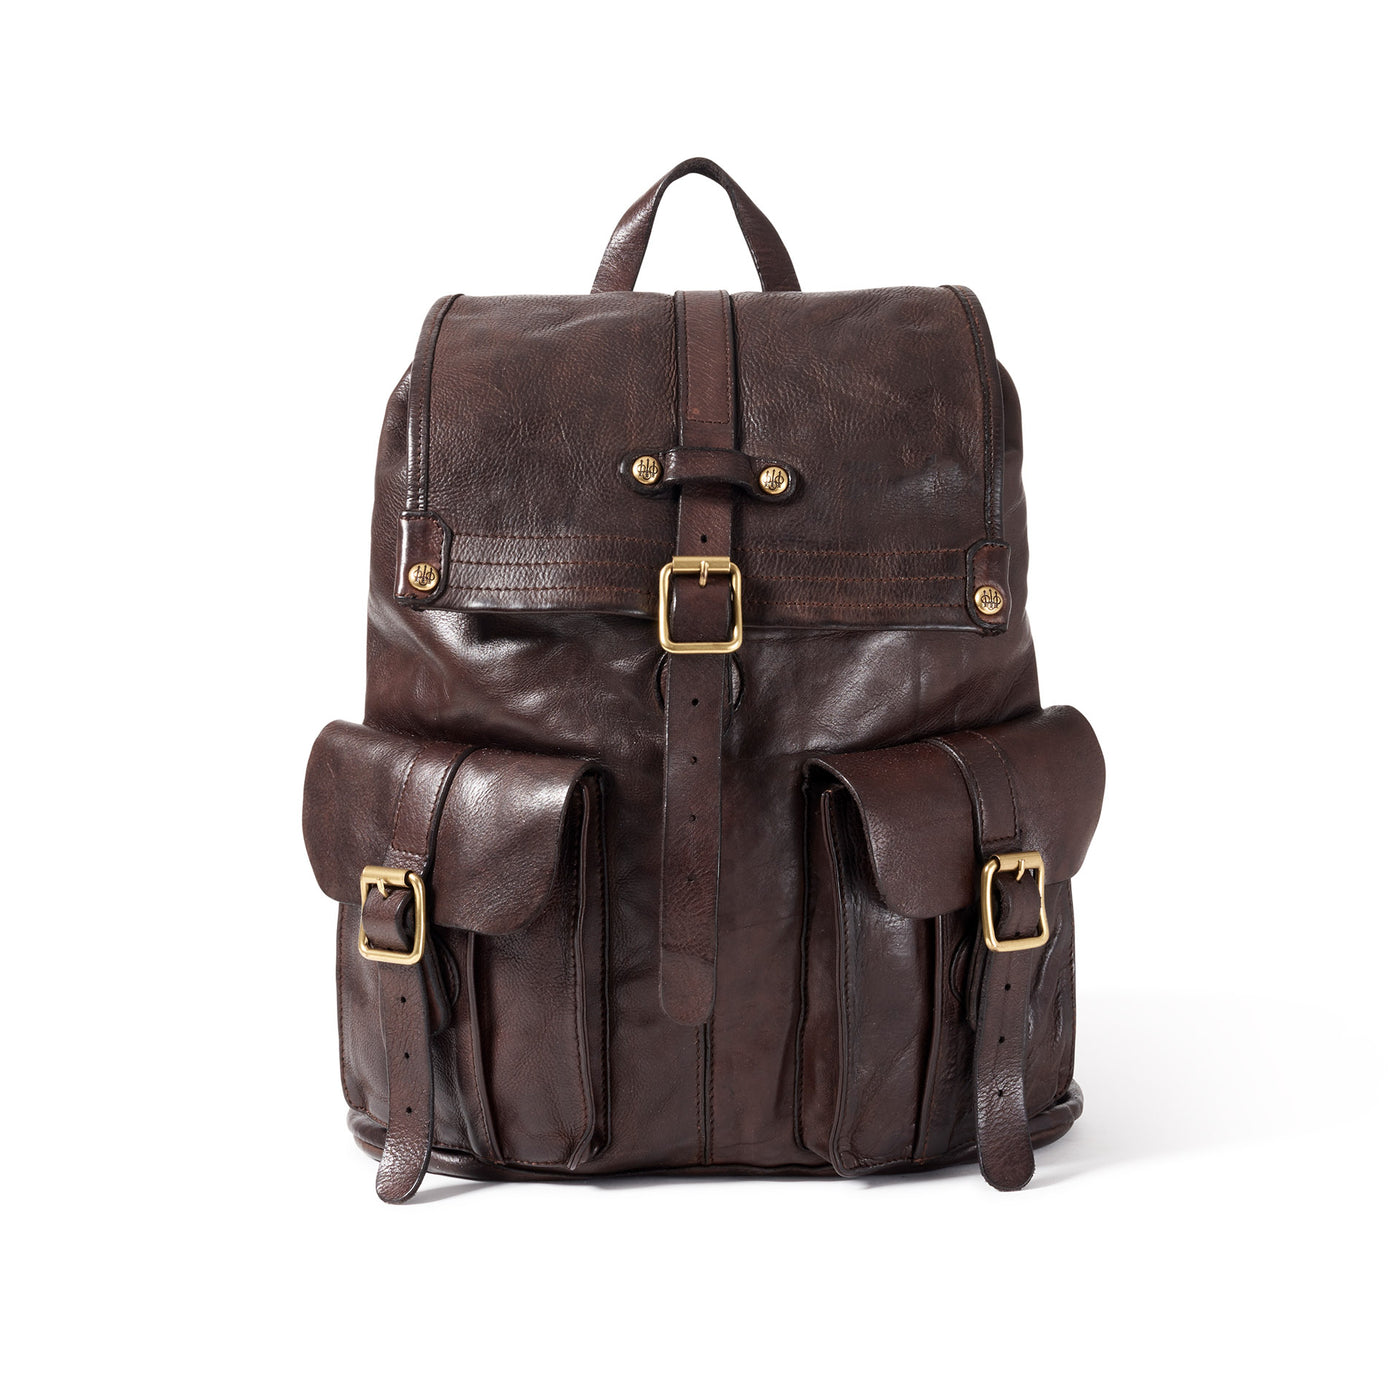 Washed Leather Backpack - Dark Brown